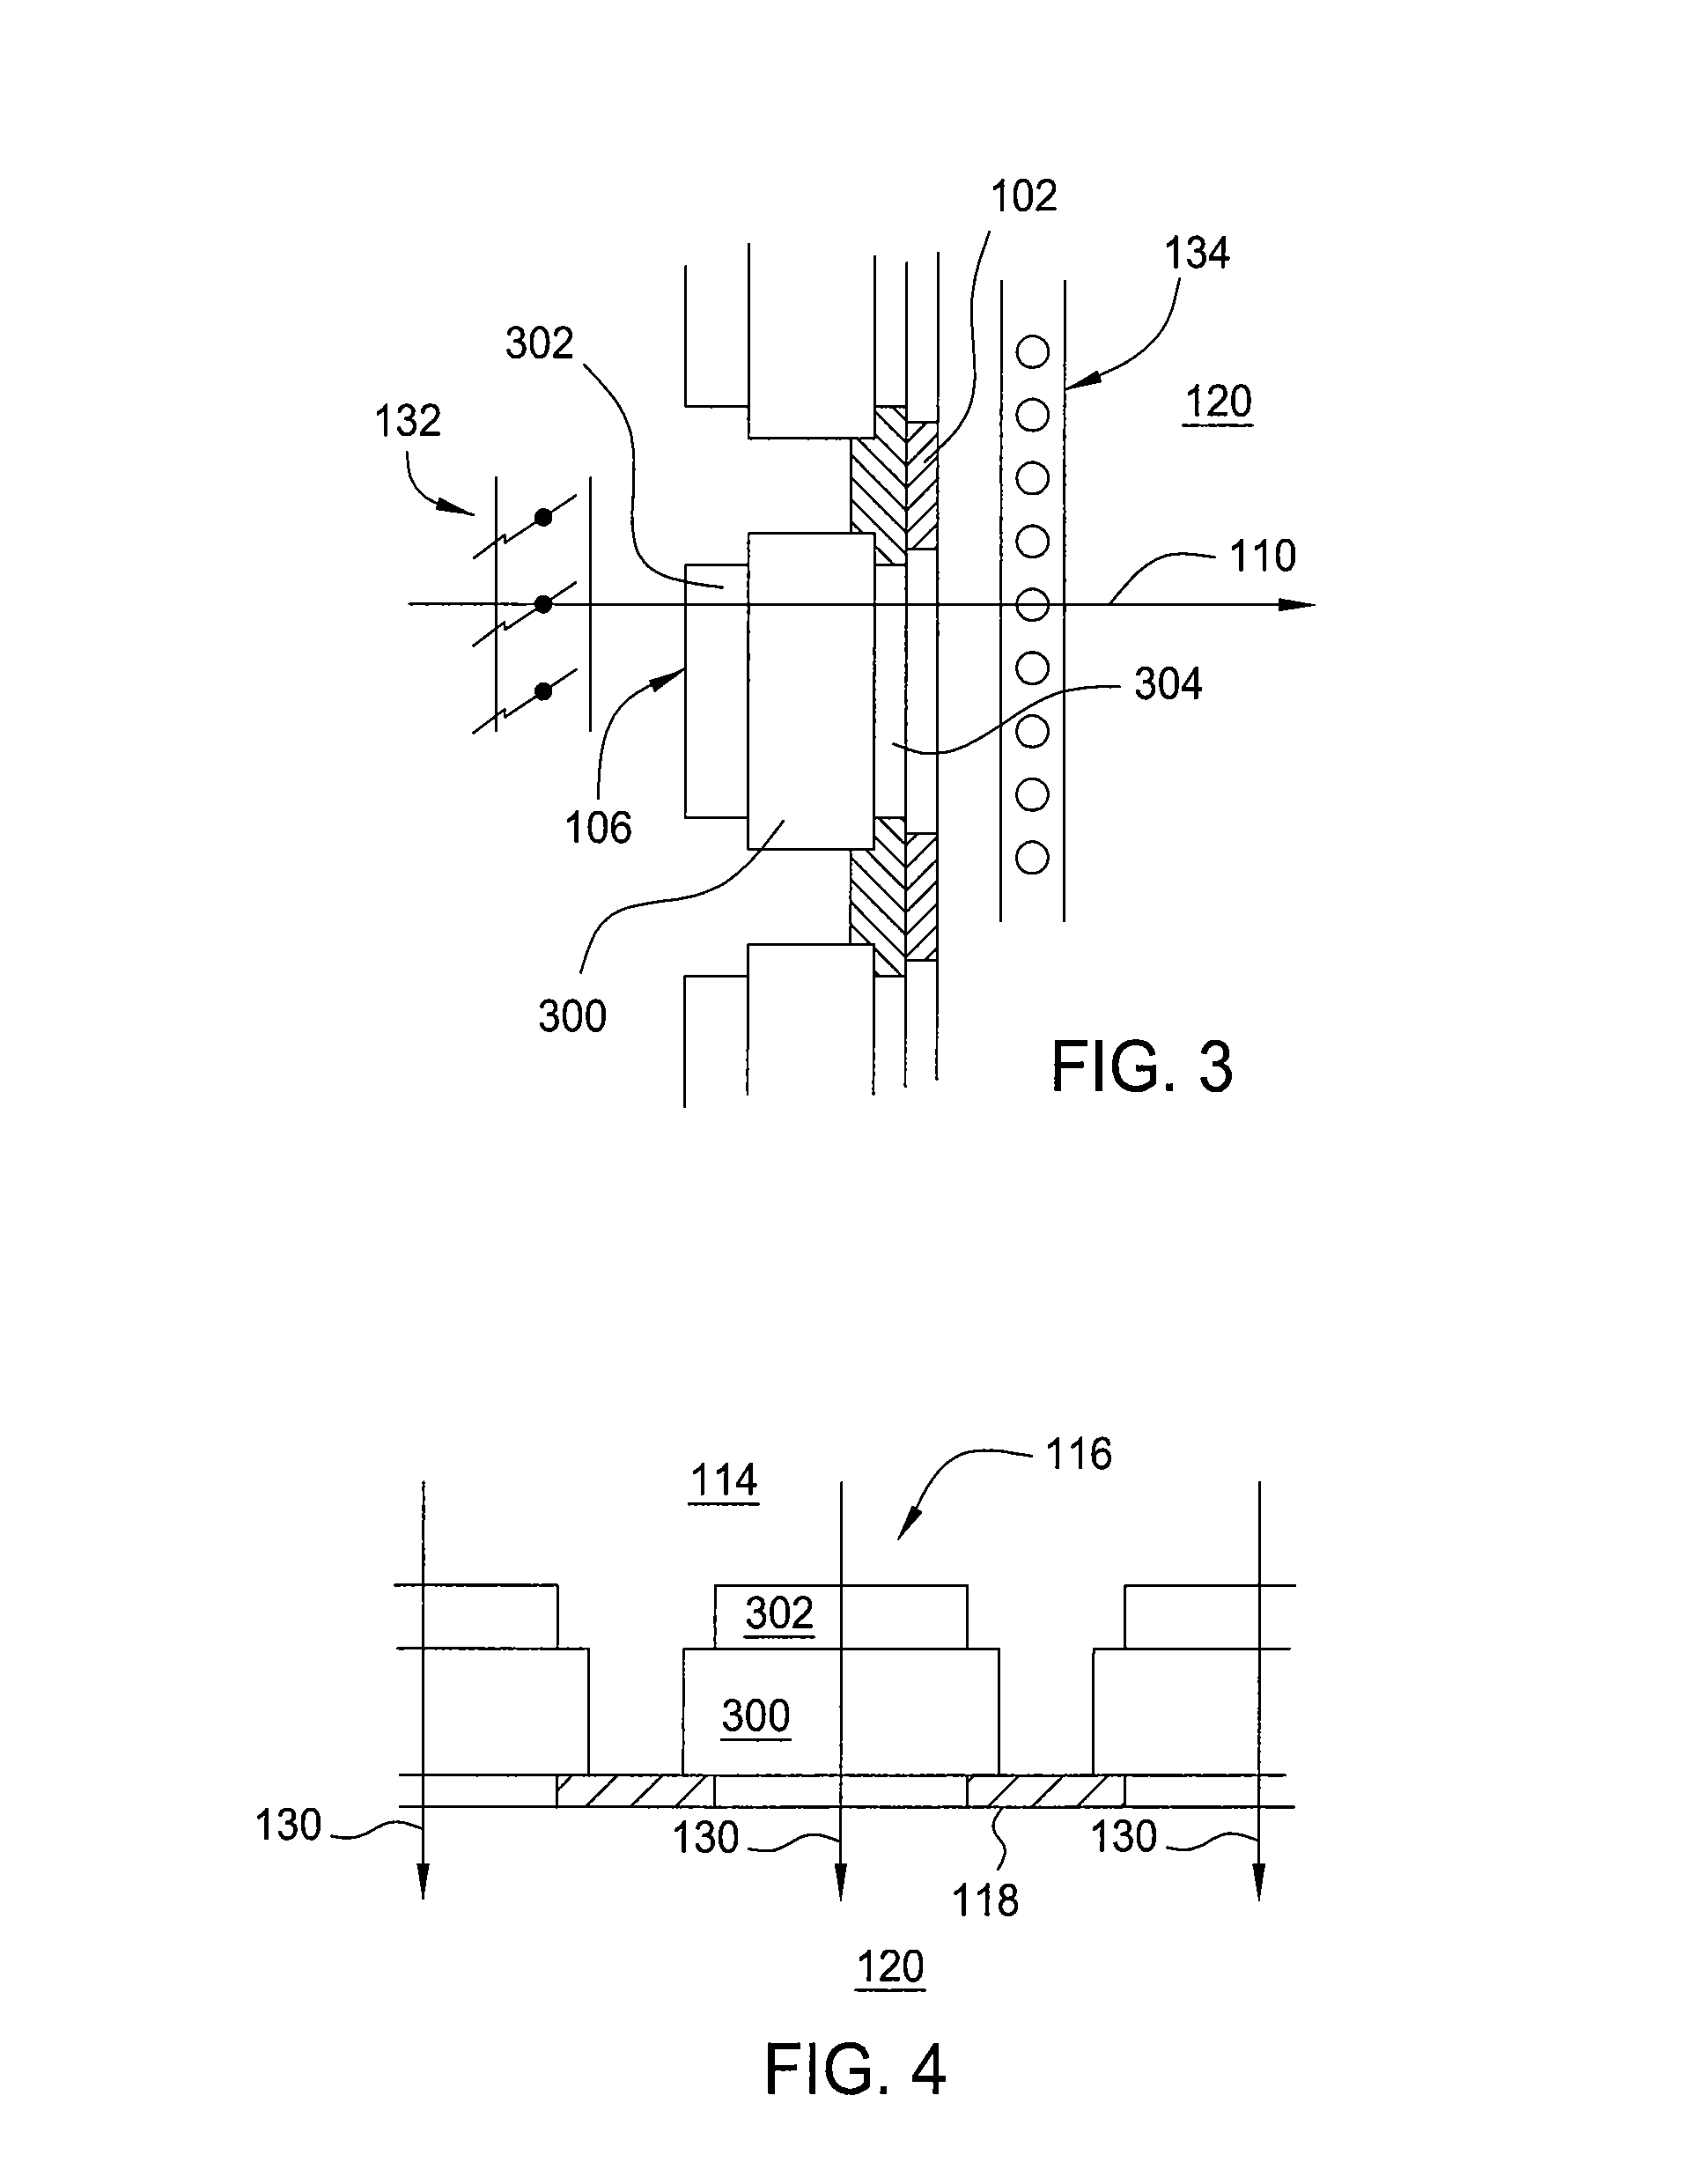 Method and apparatus for providing clean air to animal enclosures